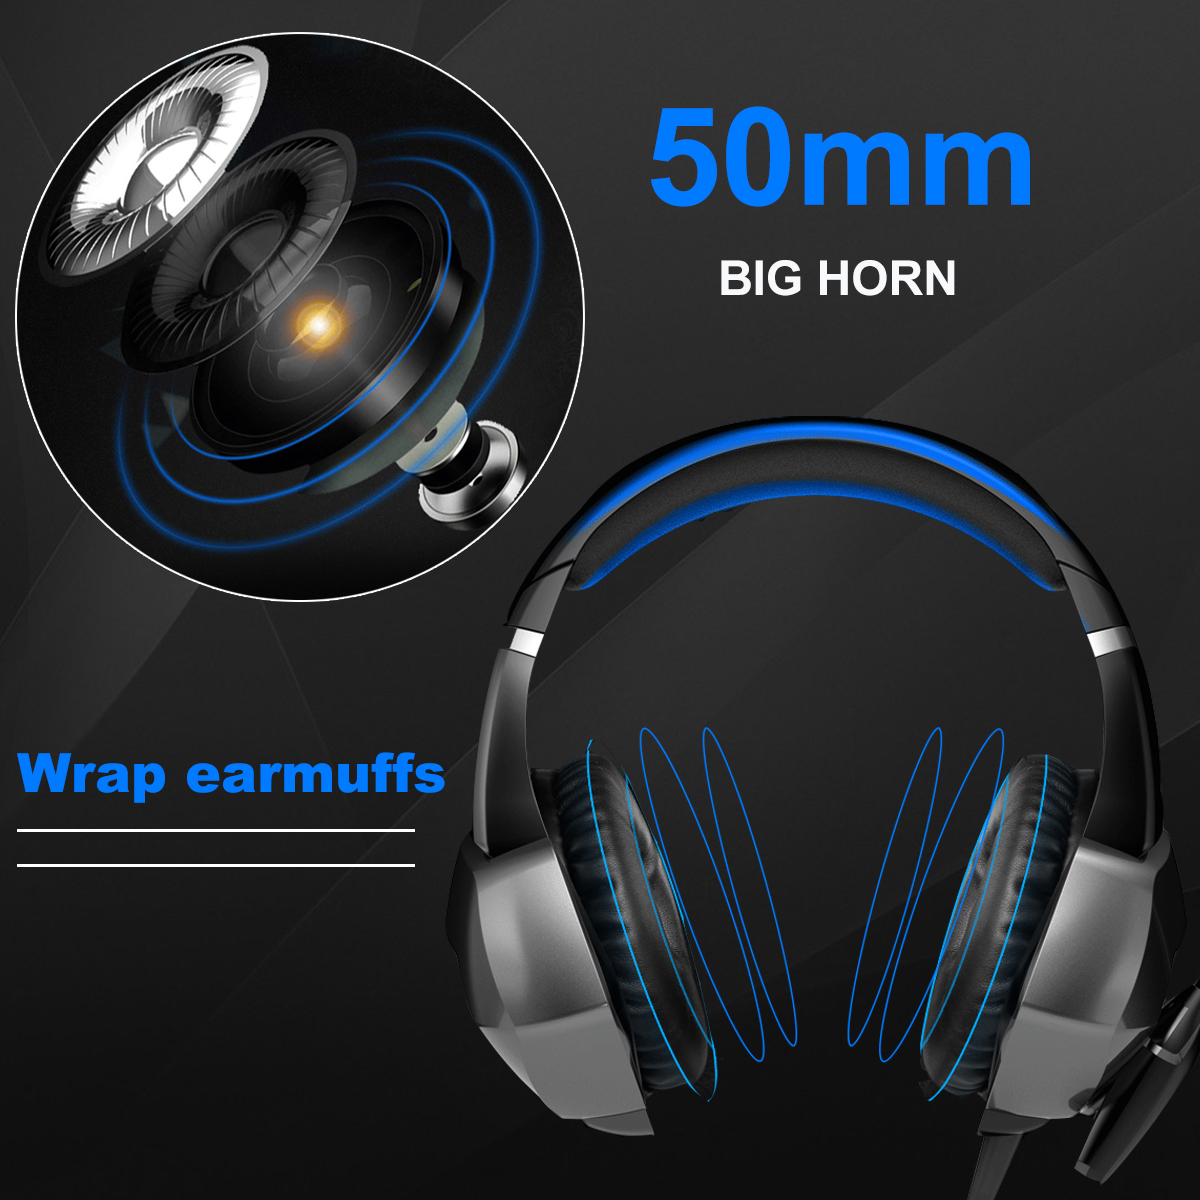 Bakeey-A6-71-Surrounding-Hifi-Sound-Gaming-Headset-LED-Headphones-with-Microphone-for-Computer-Phone-1873661-9